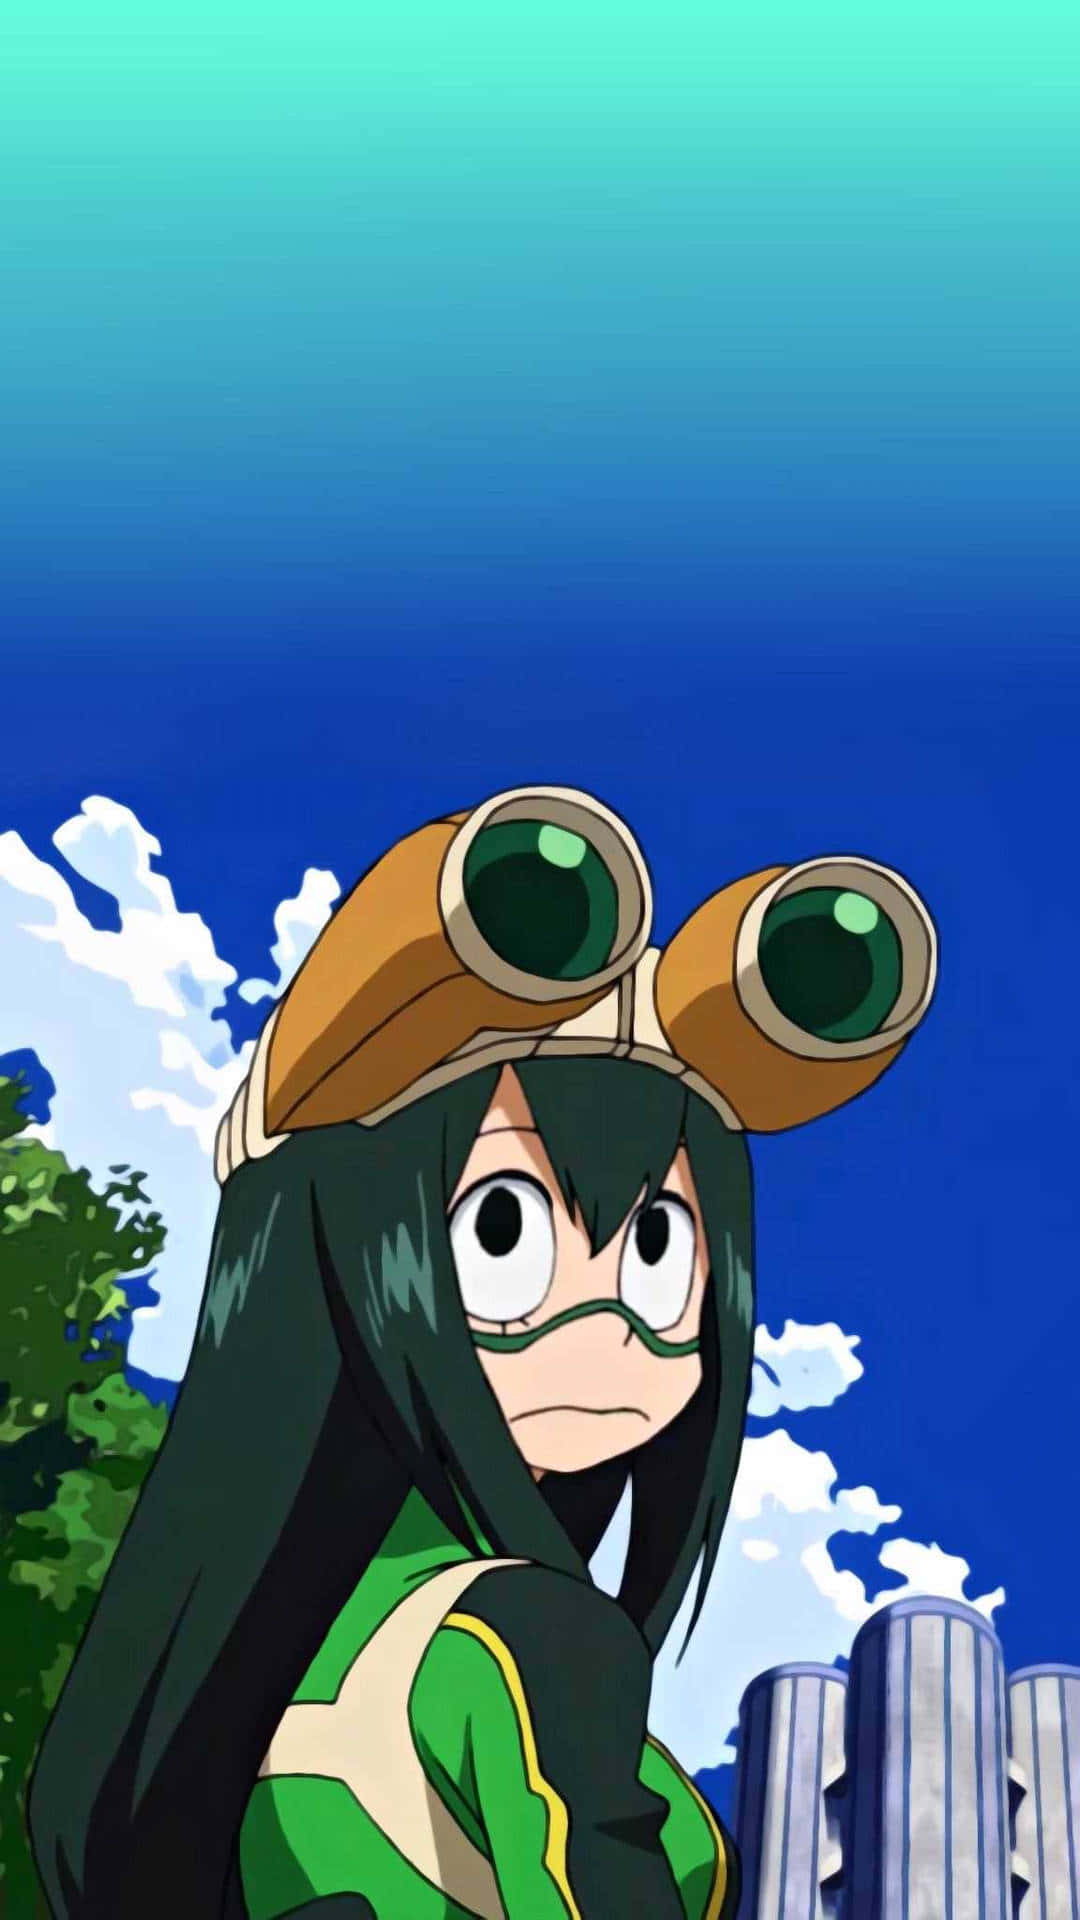 "Let Your Creative Side Show with Froppy"